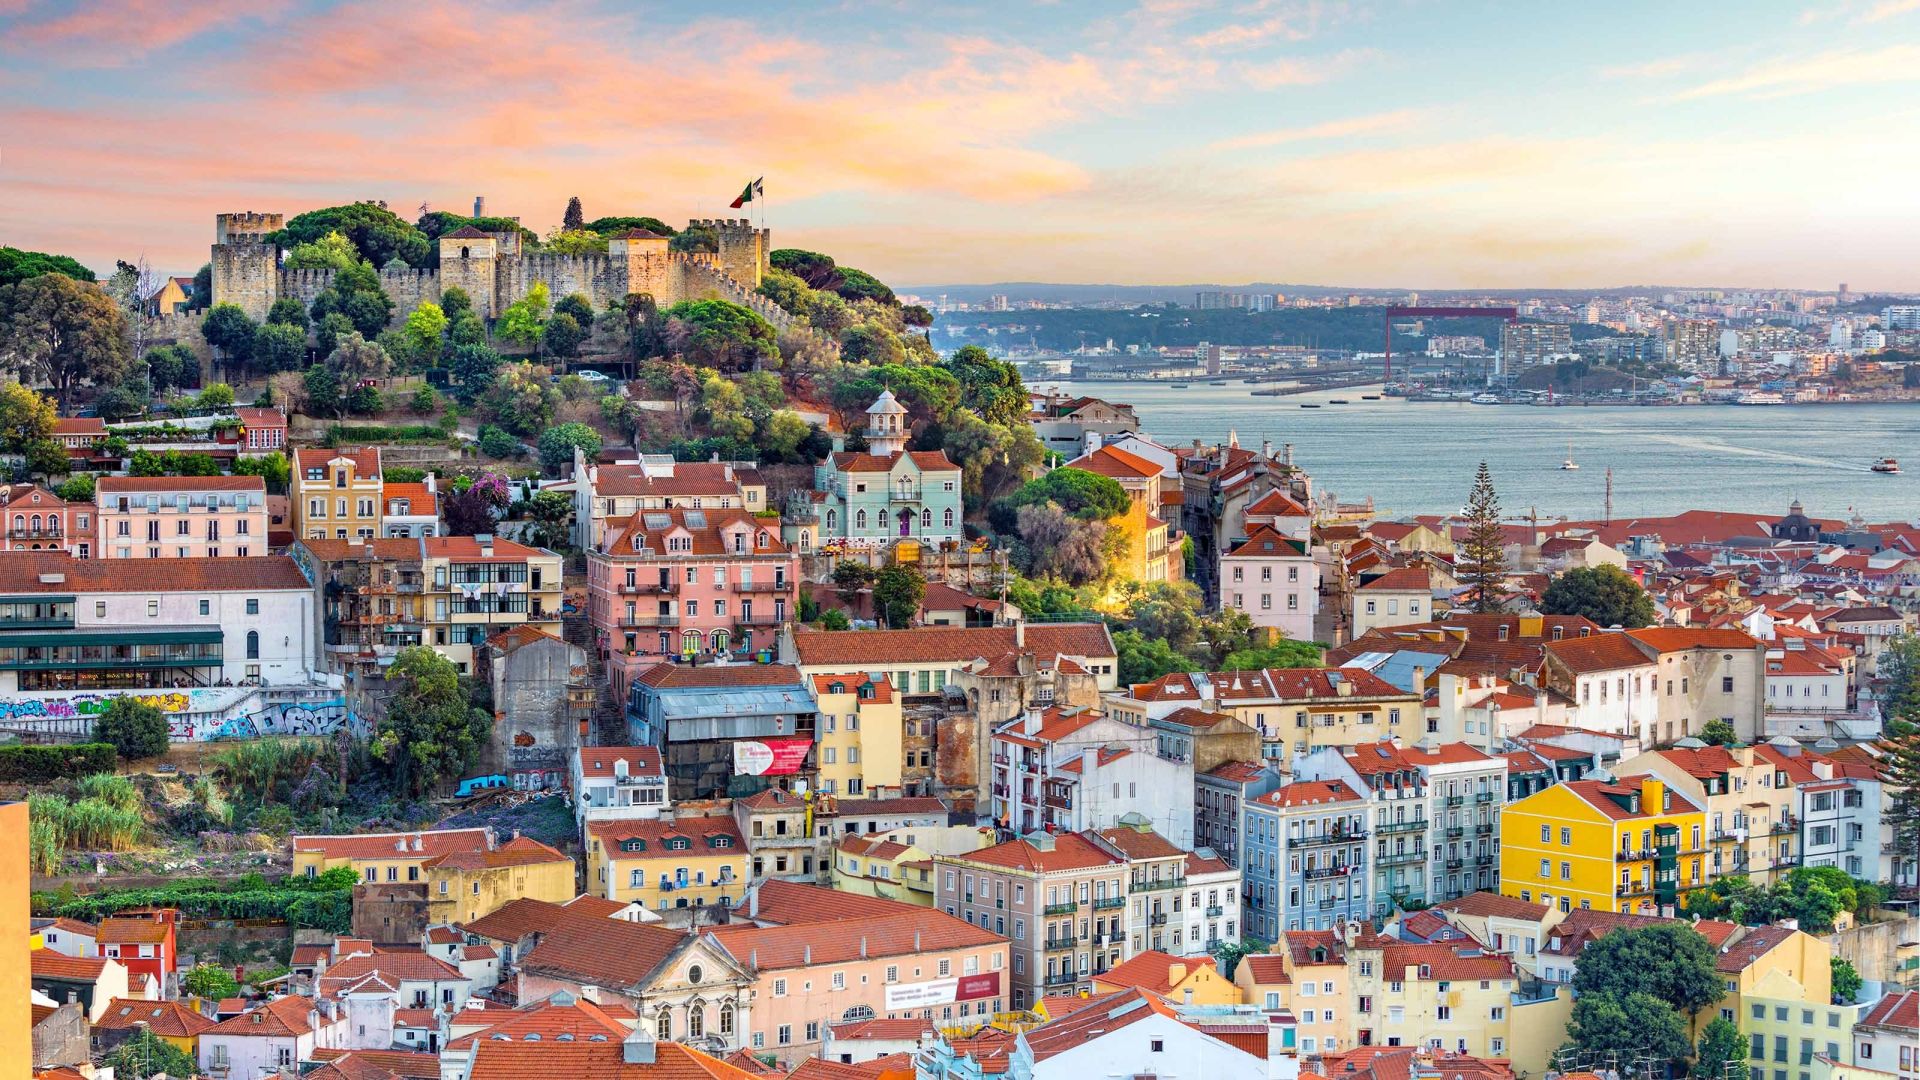 <p>                     <strong>Average daily cost: $116<br> Average accommodation cost: $75<br> Average daily meals cost: $34</strong>                   </p>                                      <p>                     Portugal is one of the best-value destinations in Europe. It's known for its seafood, wine, views, delicious custard tarts (pastéis de nata), and 300+ days of sunshine. Whether you head for vibrant Lisbon, to the sandy beaches of the south or for a wine and port tour in Porto, you’ll get a reasonably-priced vacation while enjoying the sights and sounds that this friendly southern European country has to offer.                   </p>